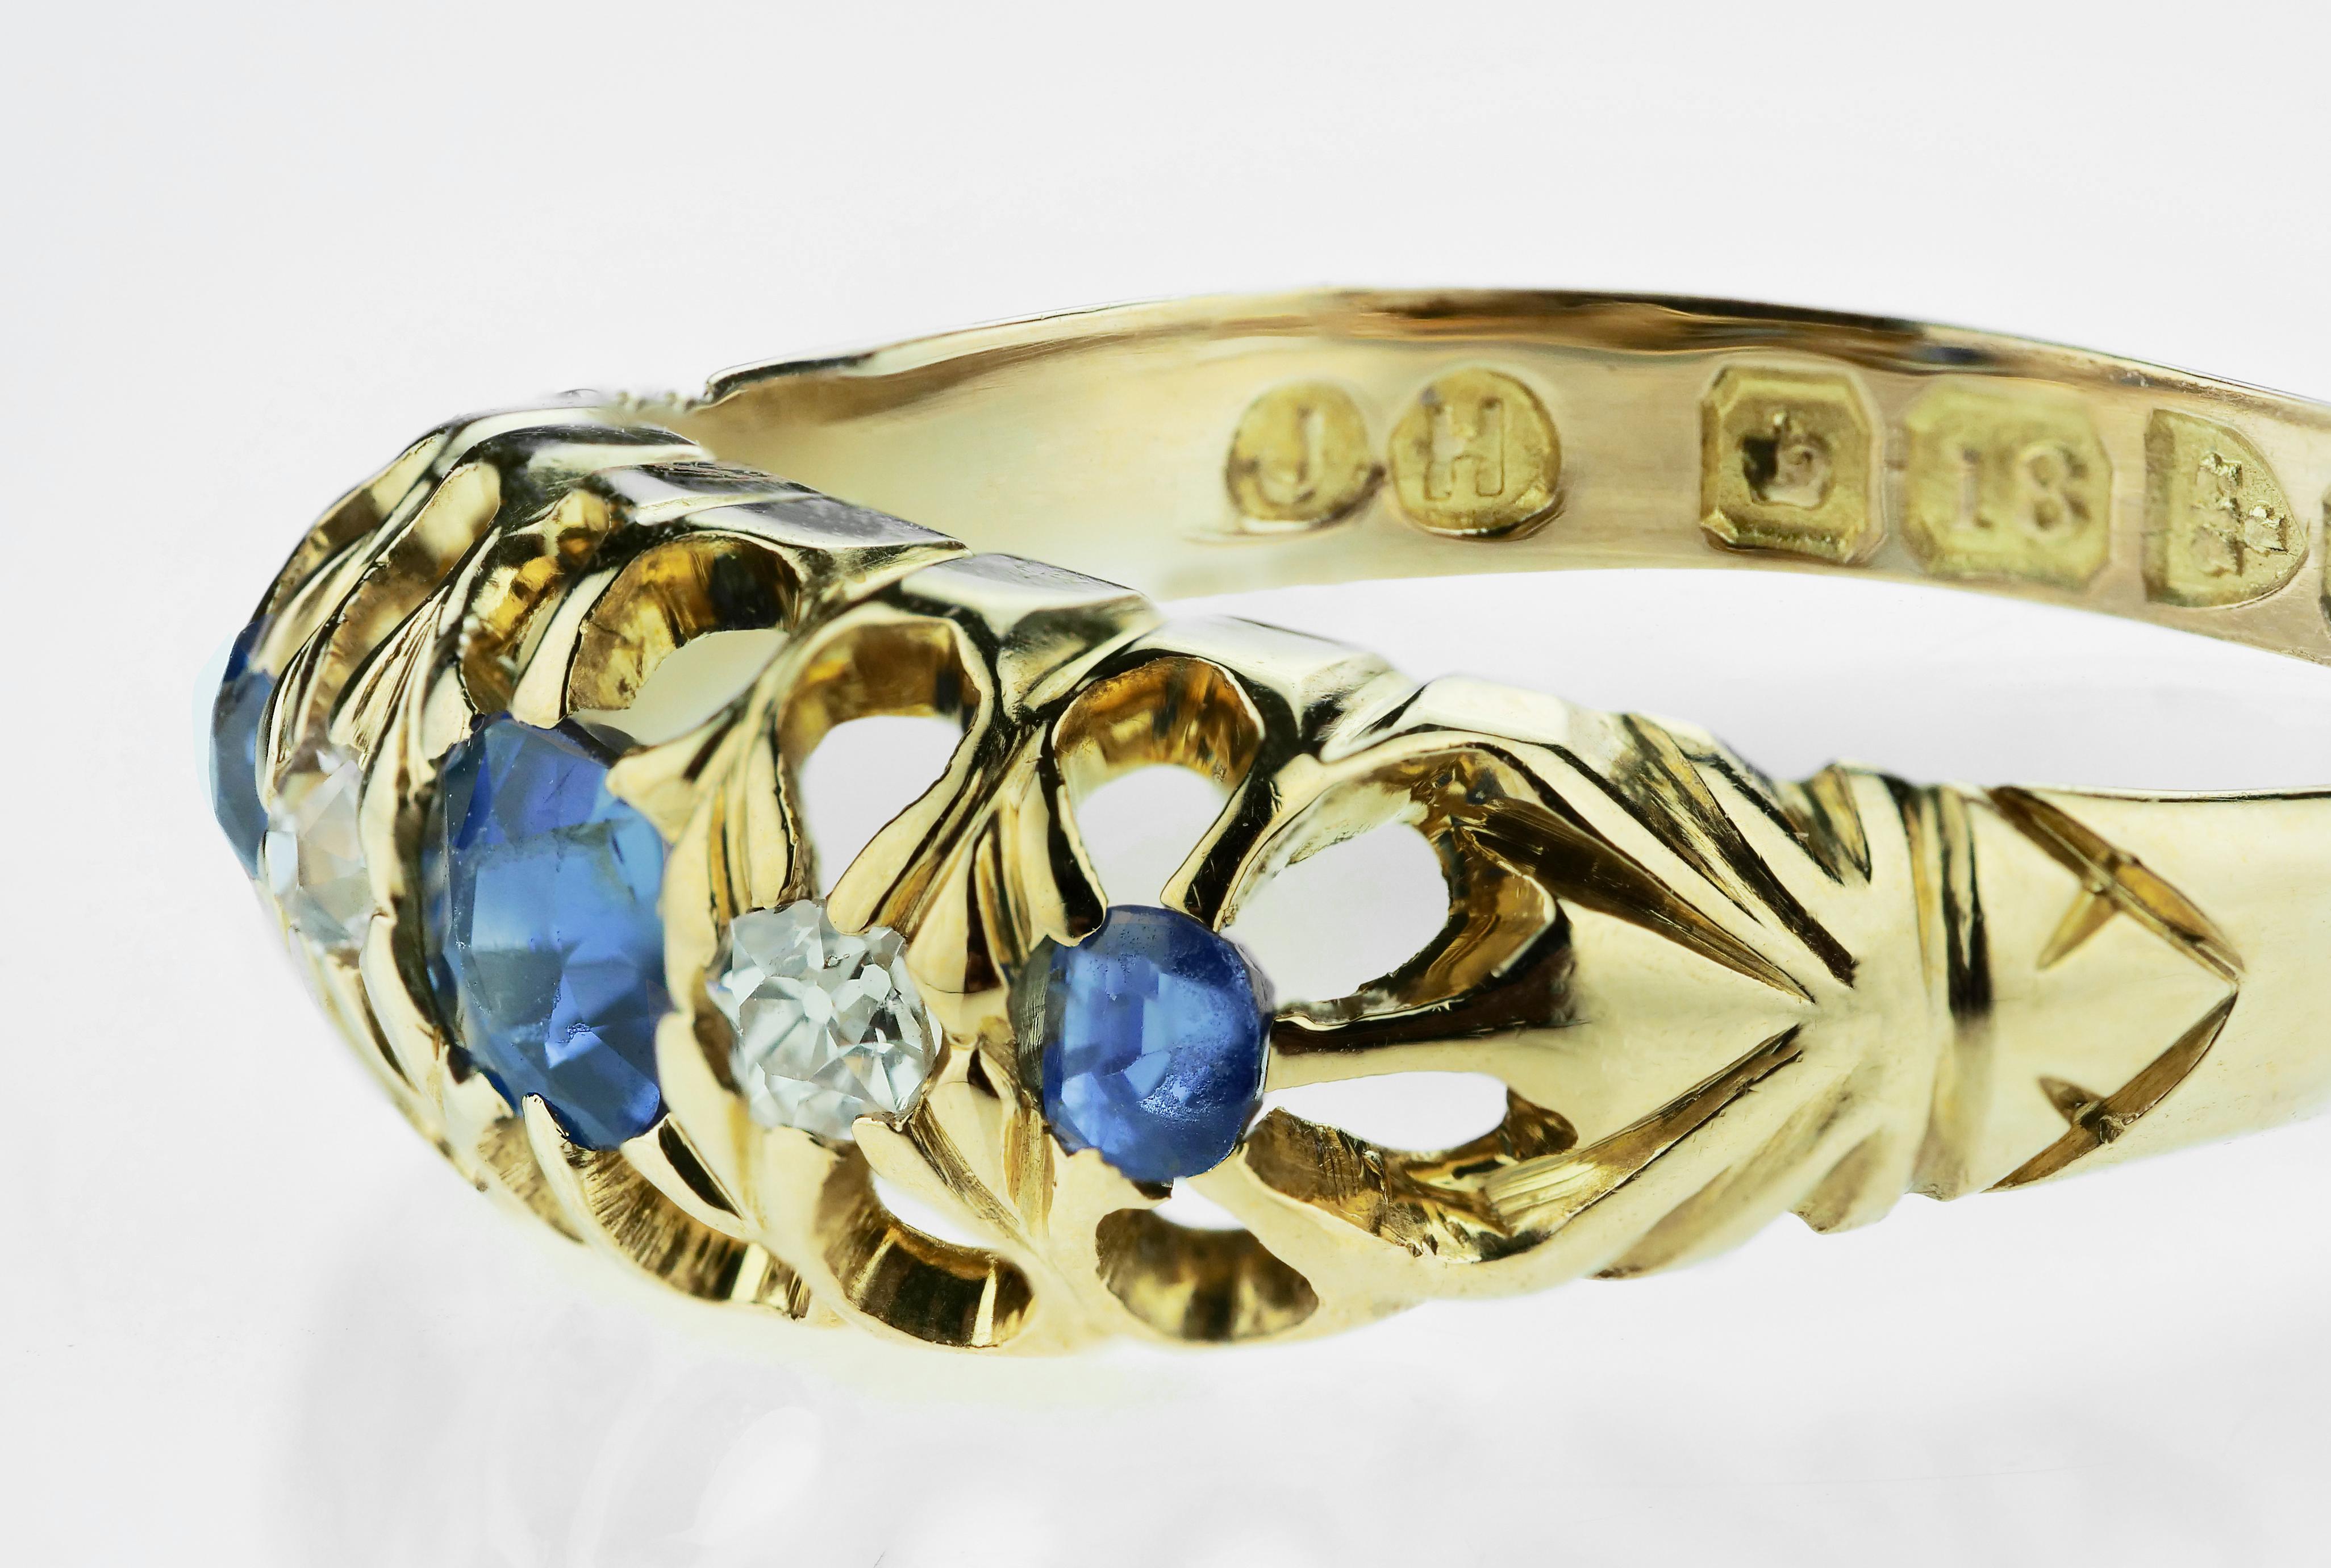 Sapphire and old European cut diamonds in 18k gold, with rare British Hallmarked, town mark Chester 1908, sponsor mark 